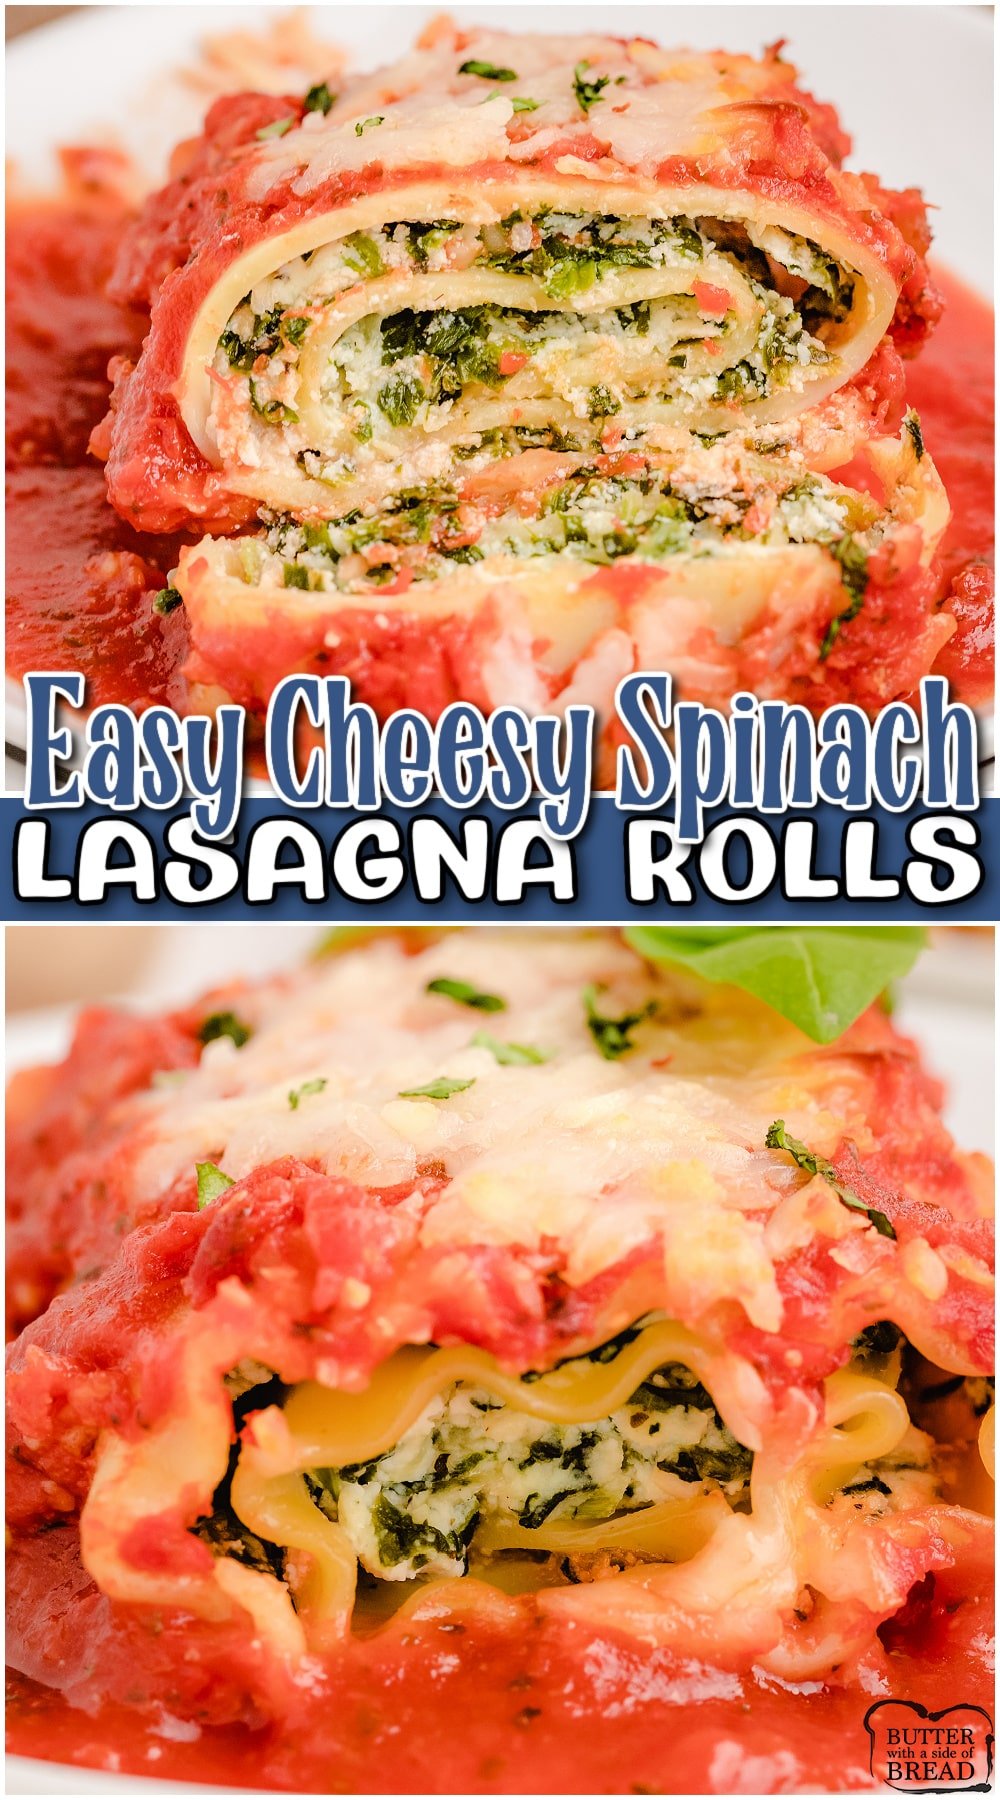 Lasagna Rolls are all the flavors of lasagna, with a fraction of the work! These spinach lasagna rolls are made with 3 types of cheese, noodles & marinara sauce. Simple, crowd pleasing dinner recipe!